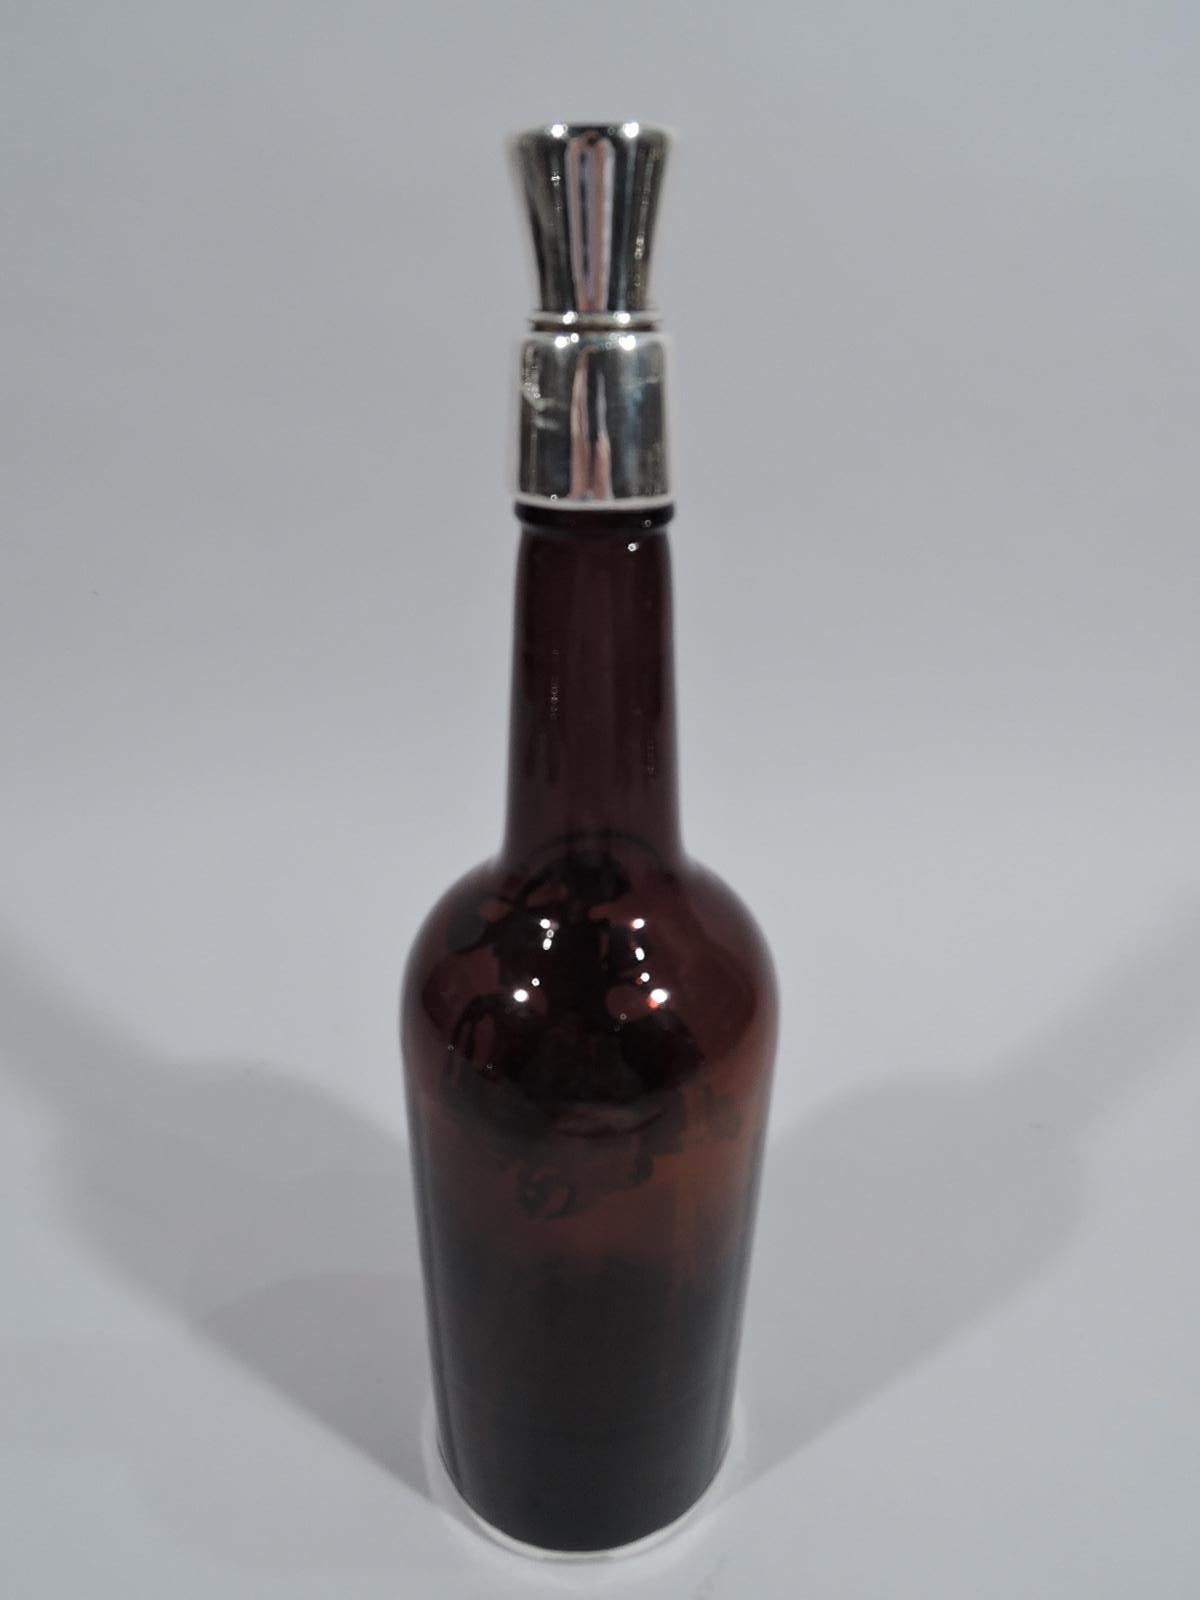 Edwardian glass decanter with engraved silver overlay, ca 1910. Bottle with straight sides, curved shoulder, and upward tapering cylindrical neck. Sterling silver rim collar and stopper with cork plug. On decanter front is pictorial overlay in form